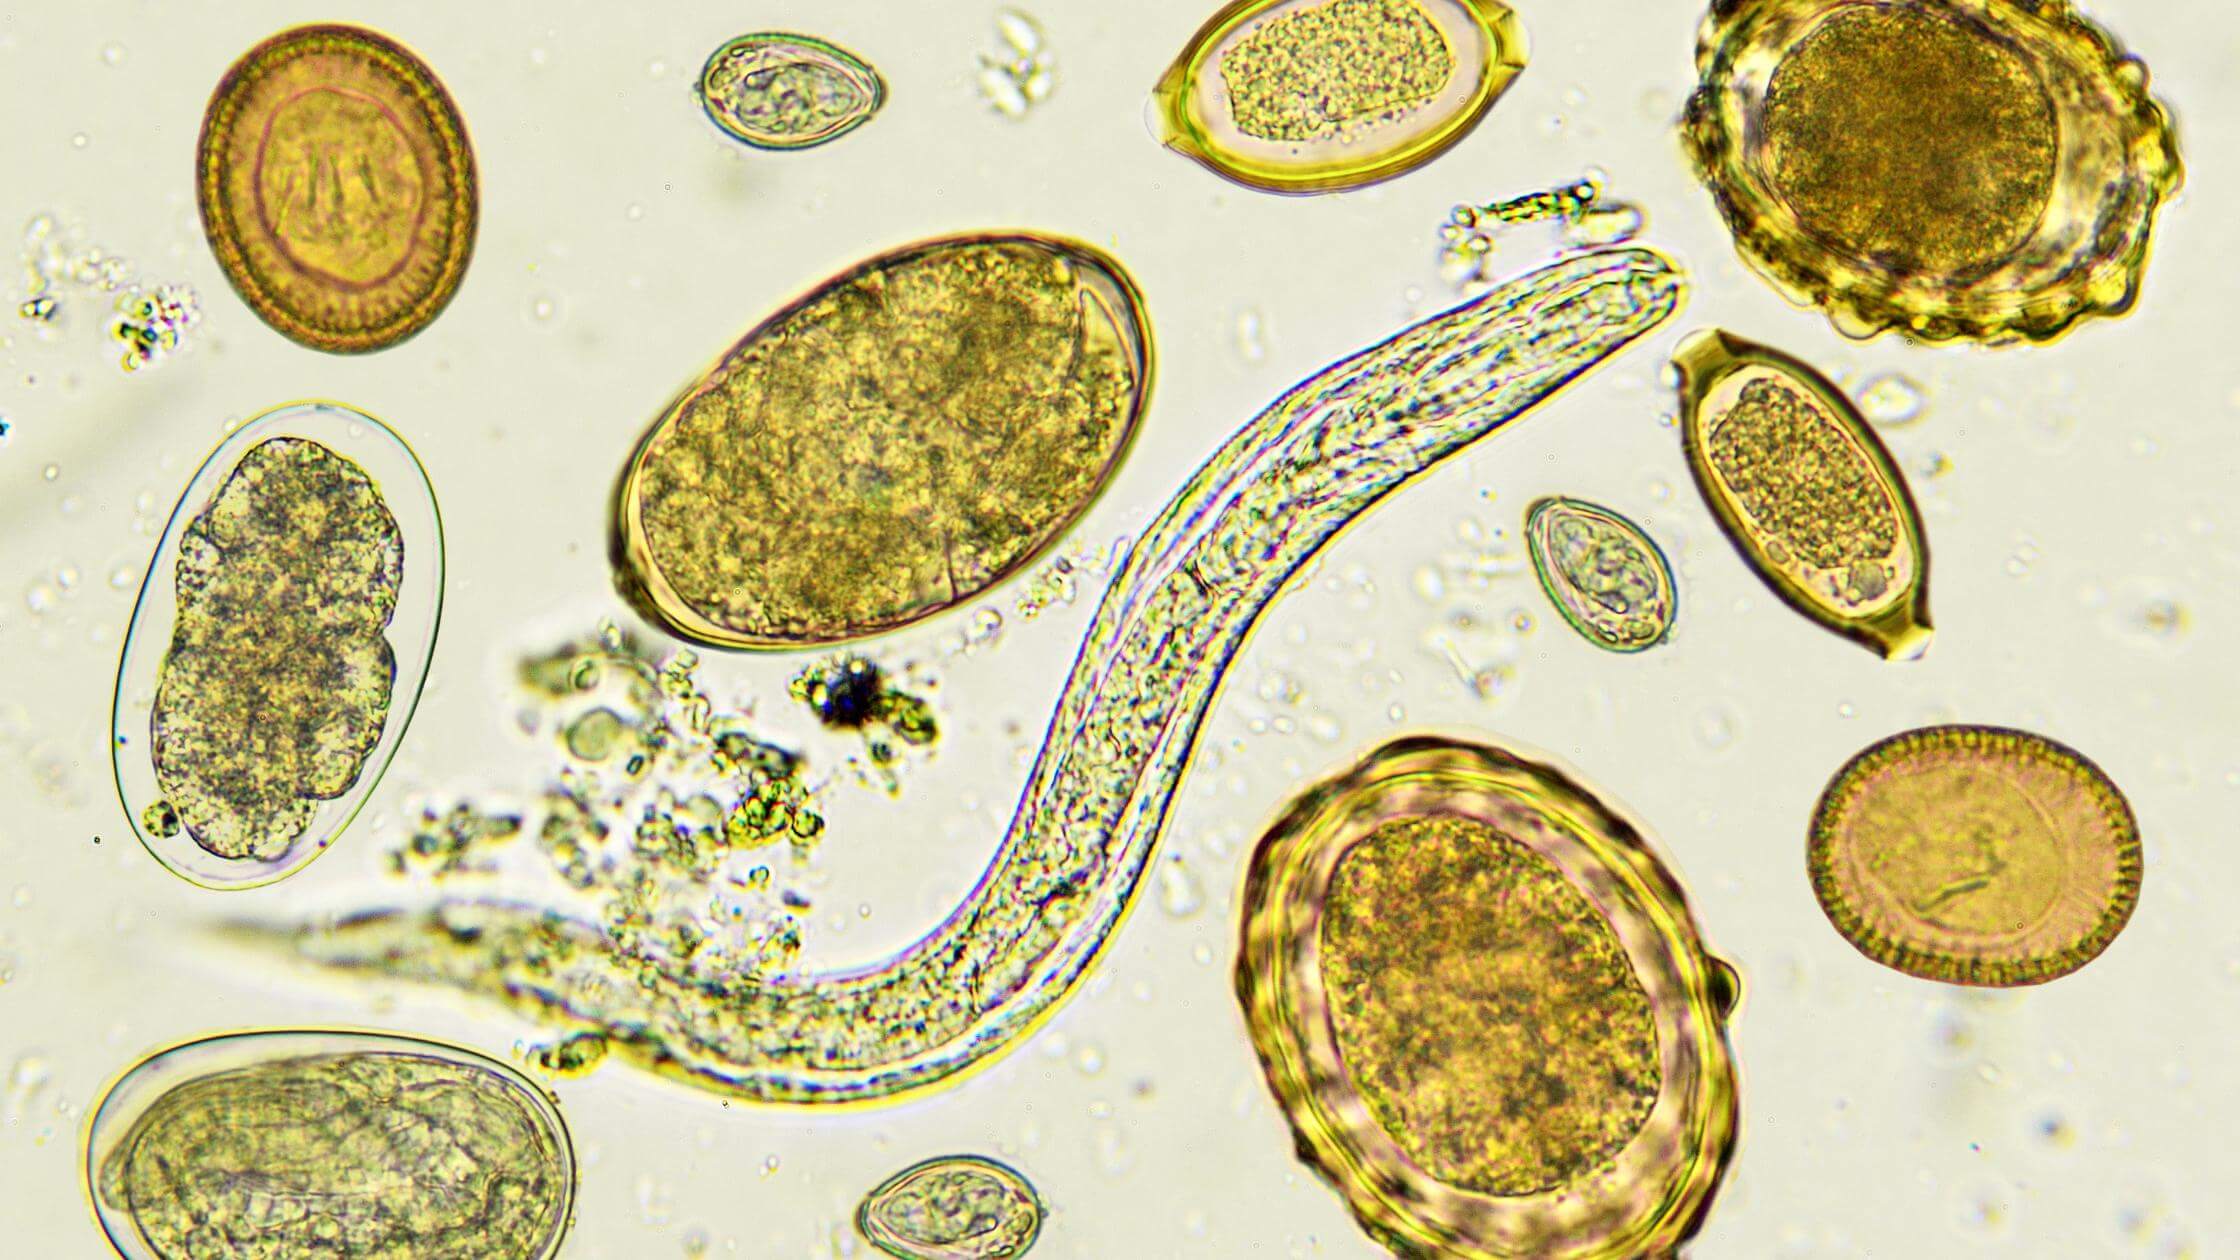 Blastocystis Parasite – What Is It And Why You Want To Get Rid Of It